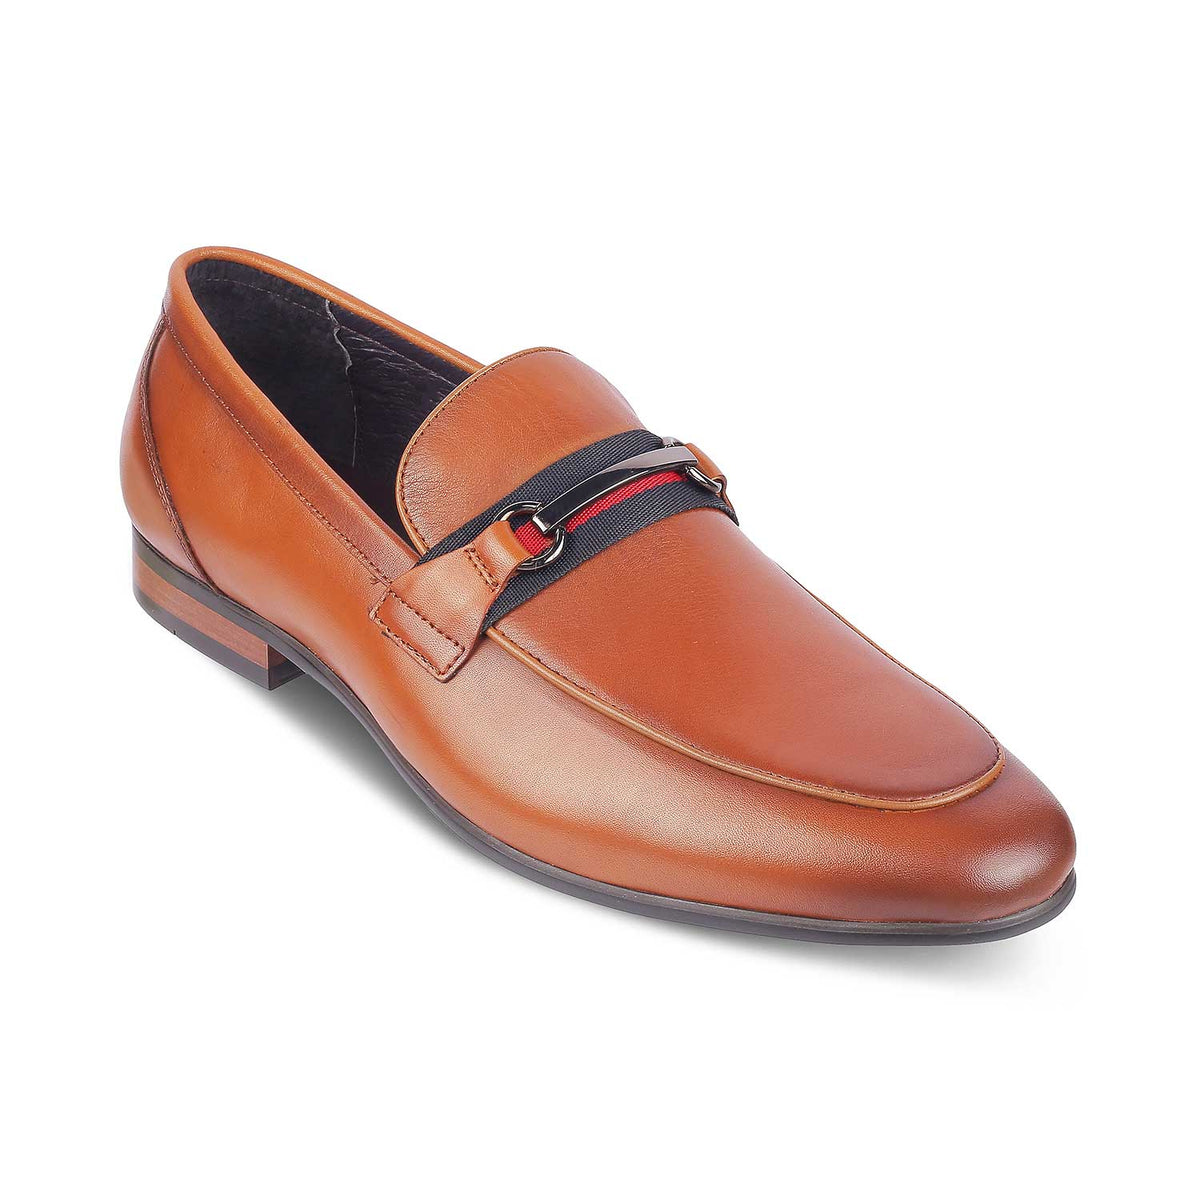 Tresmode Merci Brown Men's Leather Loafers - Tresmode